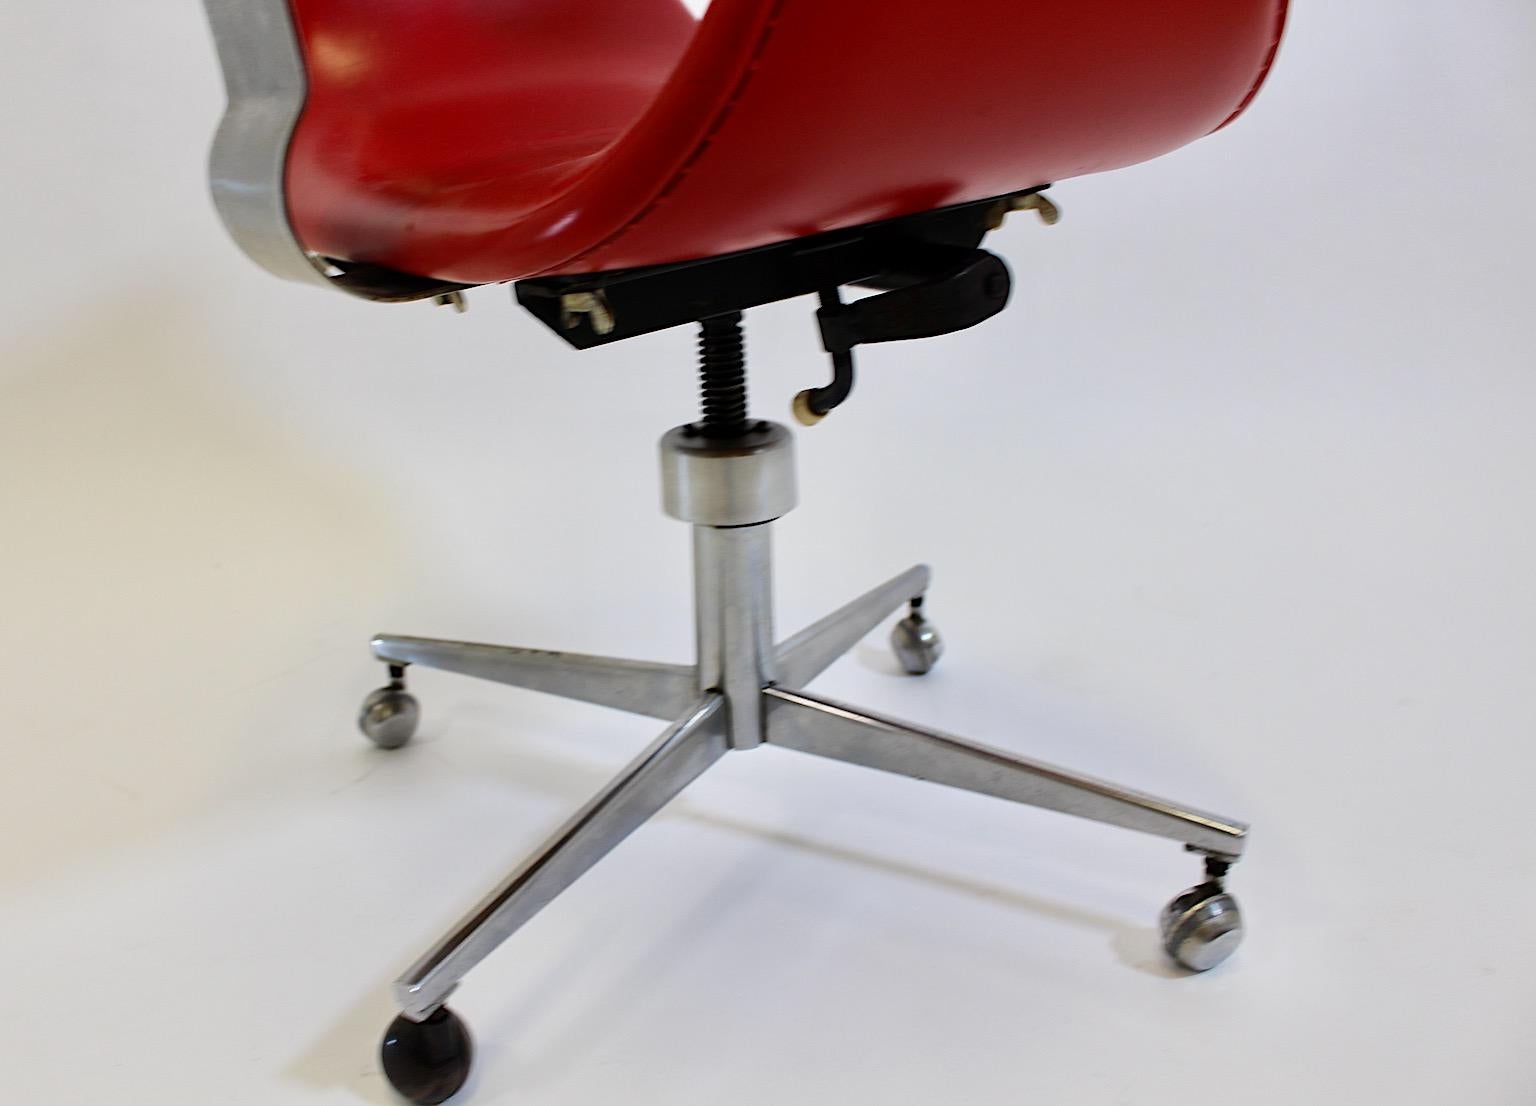 Space Age Vintage Red Faux Leather Chrome Metal Office Chair Desk Chair 1960s For Sale 4